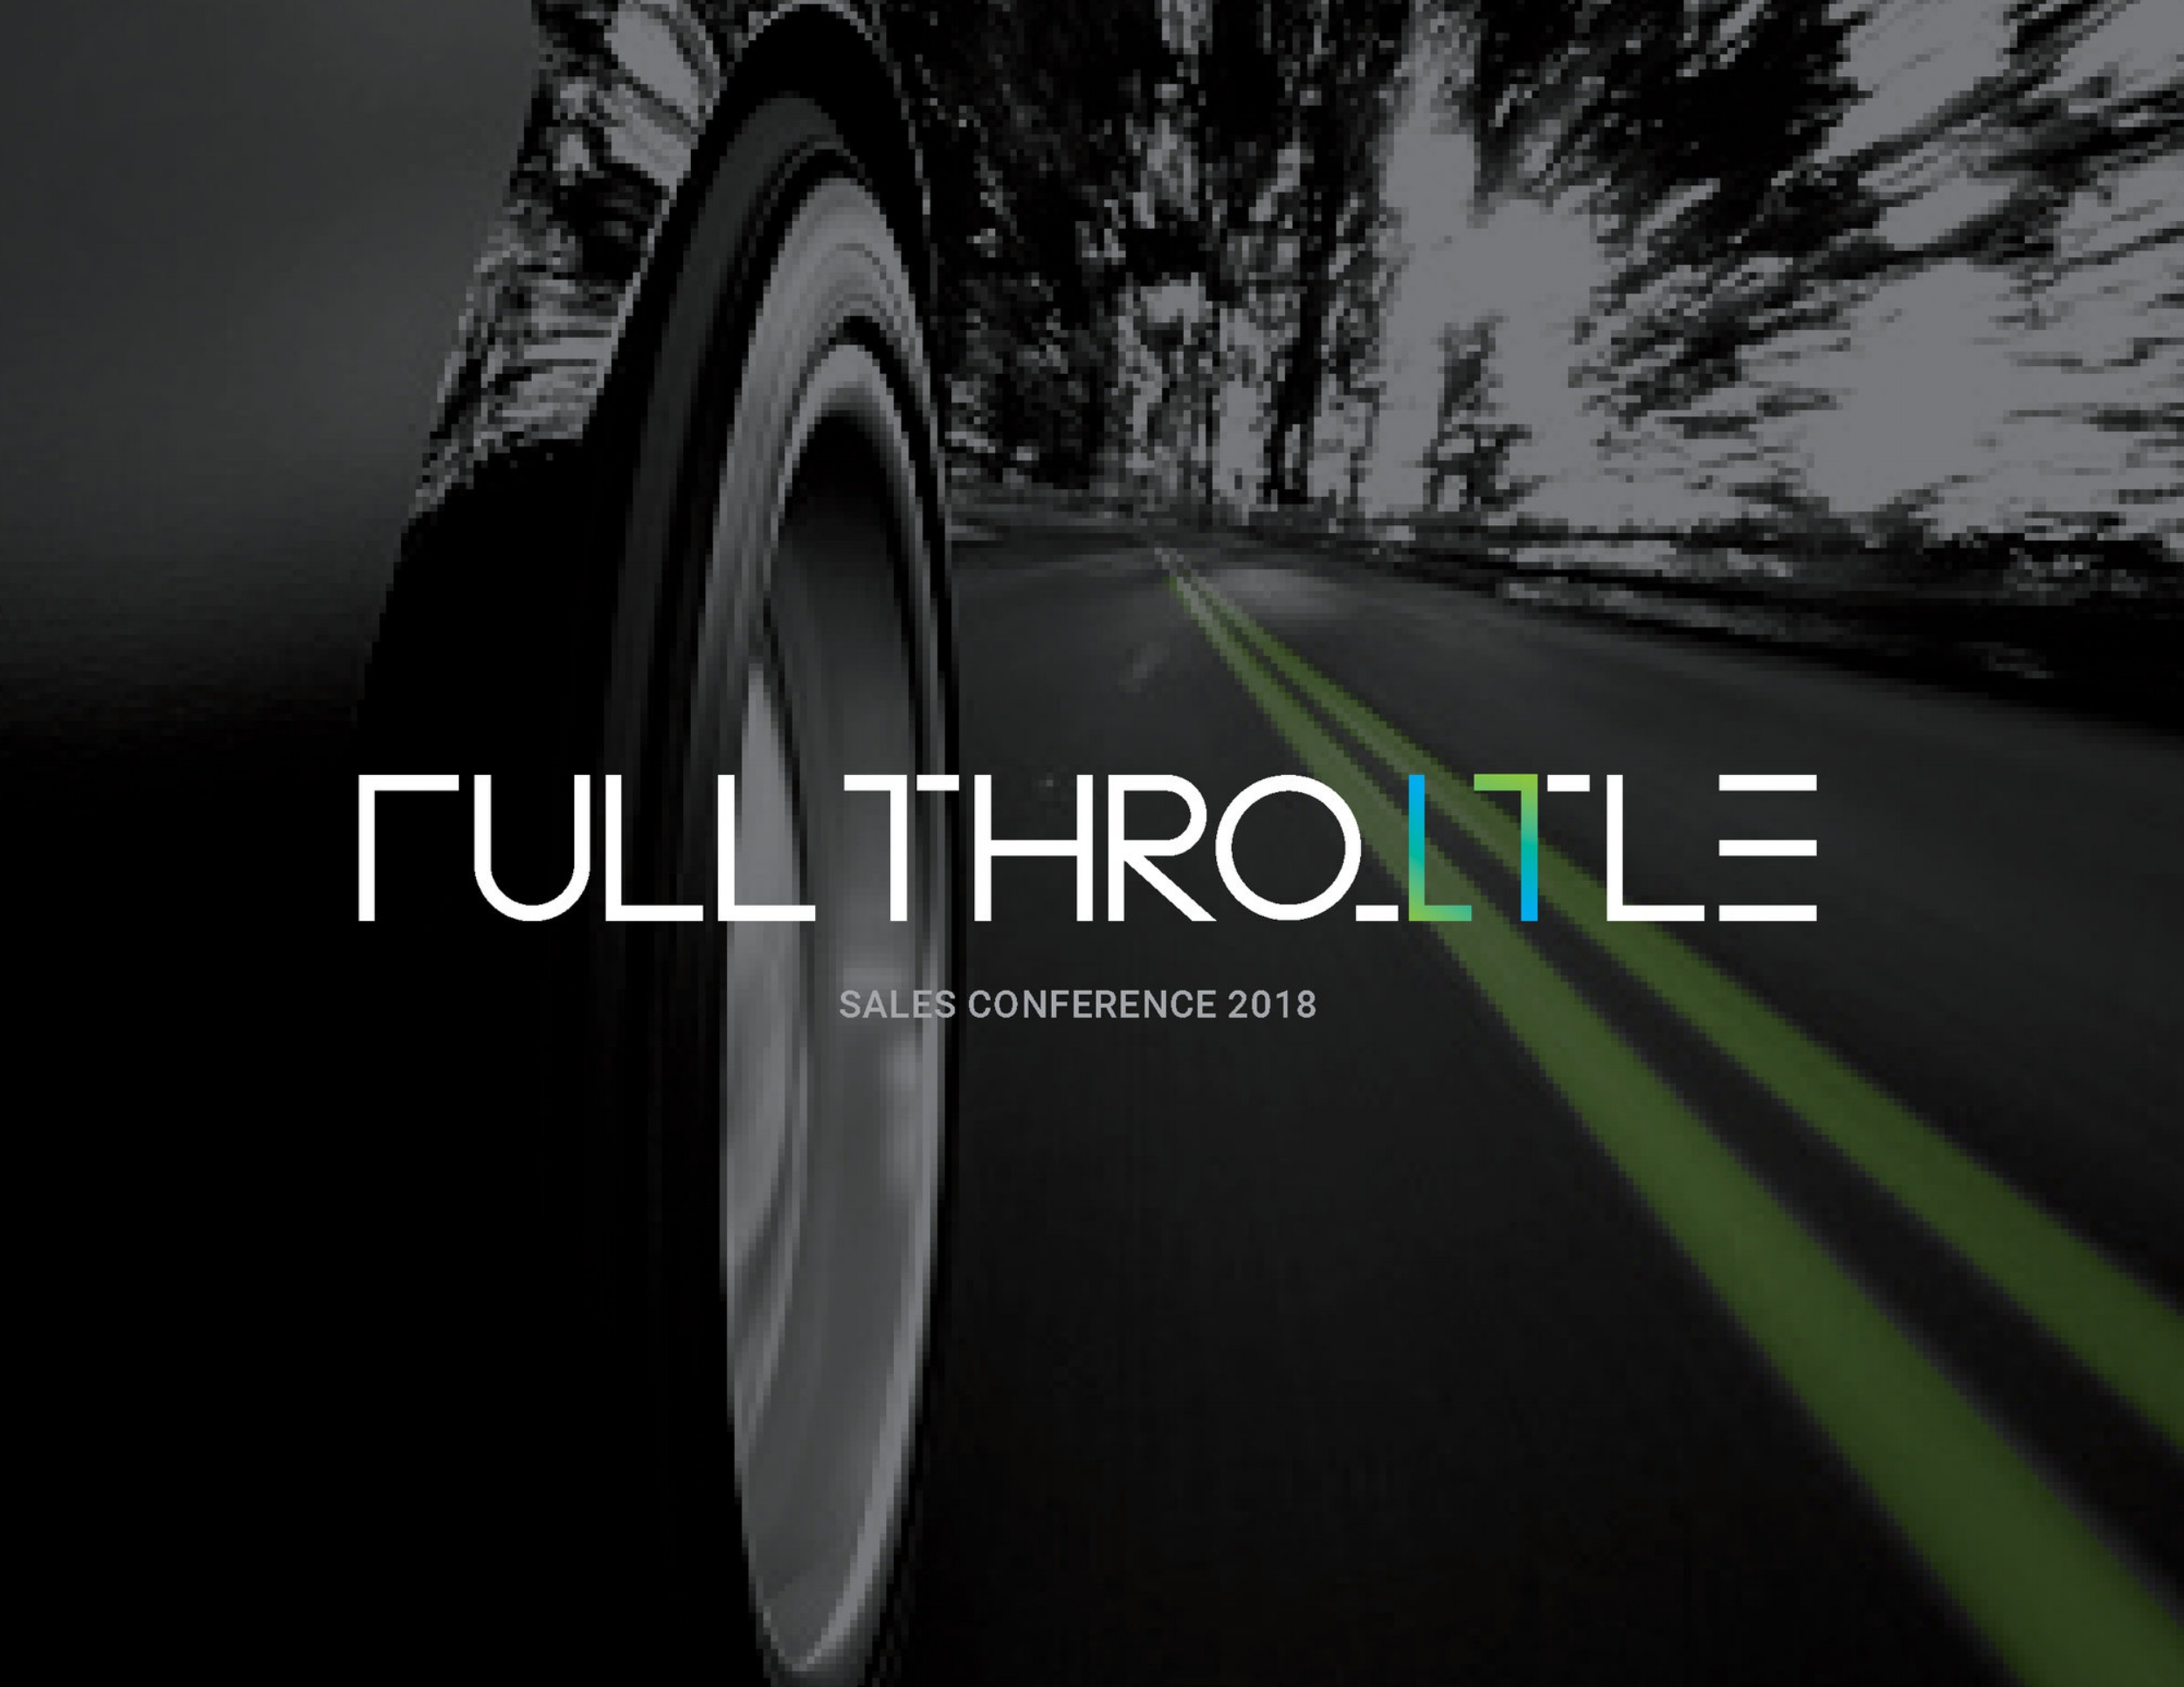 SAI Global Sales Conference: "Full Throttle" Campaign 